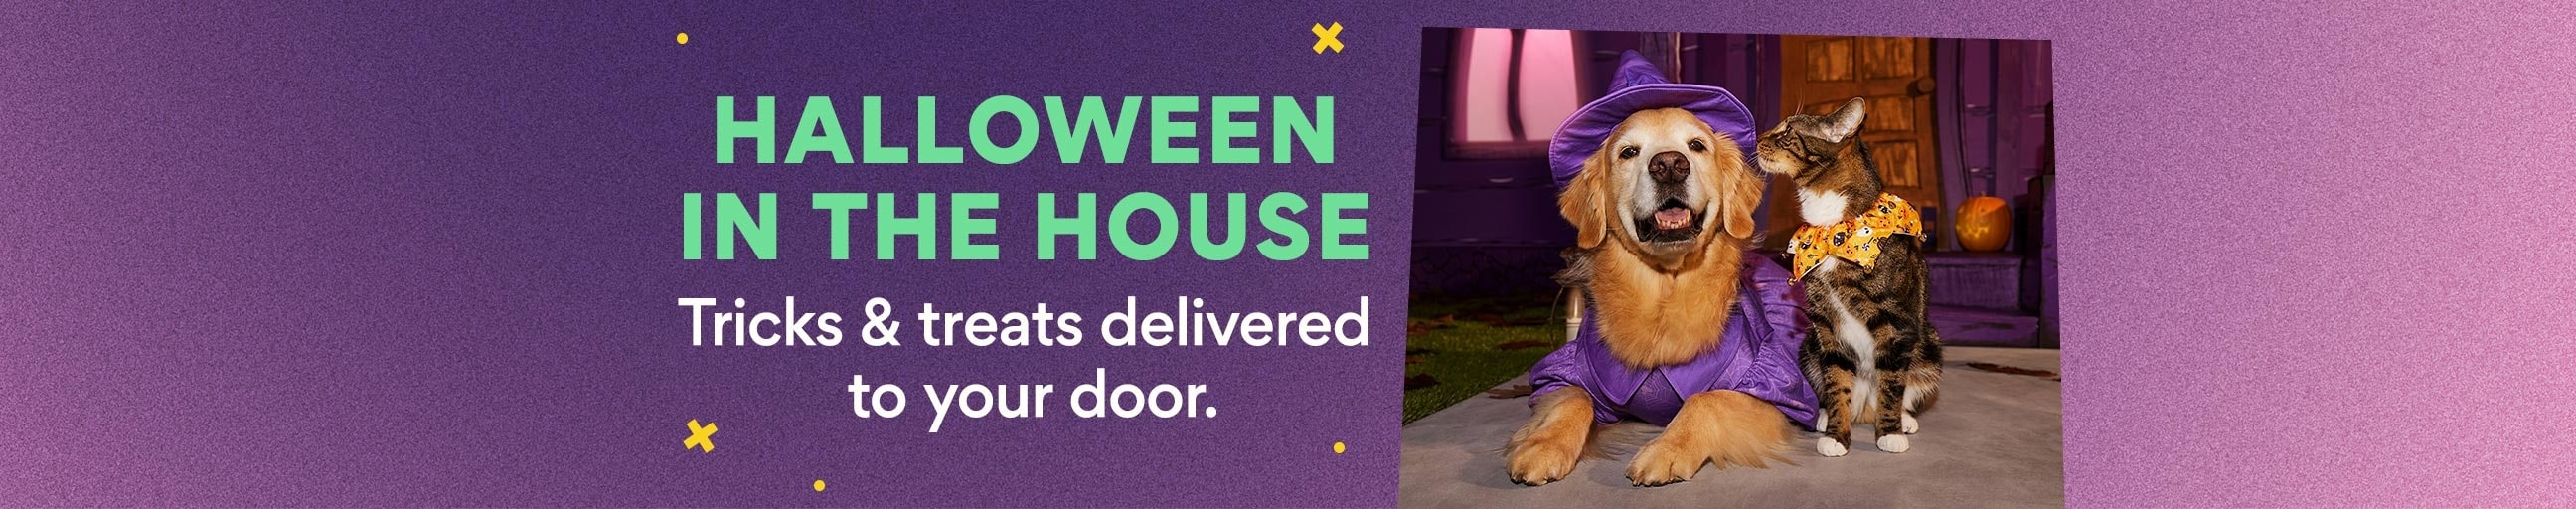 halloween in the house. tricks and treats delivered to your door